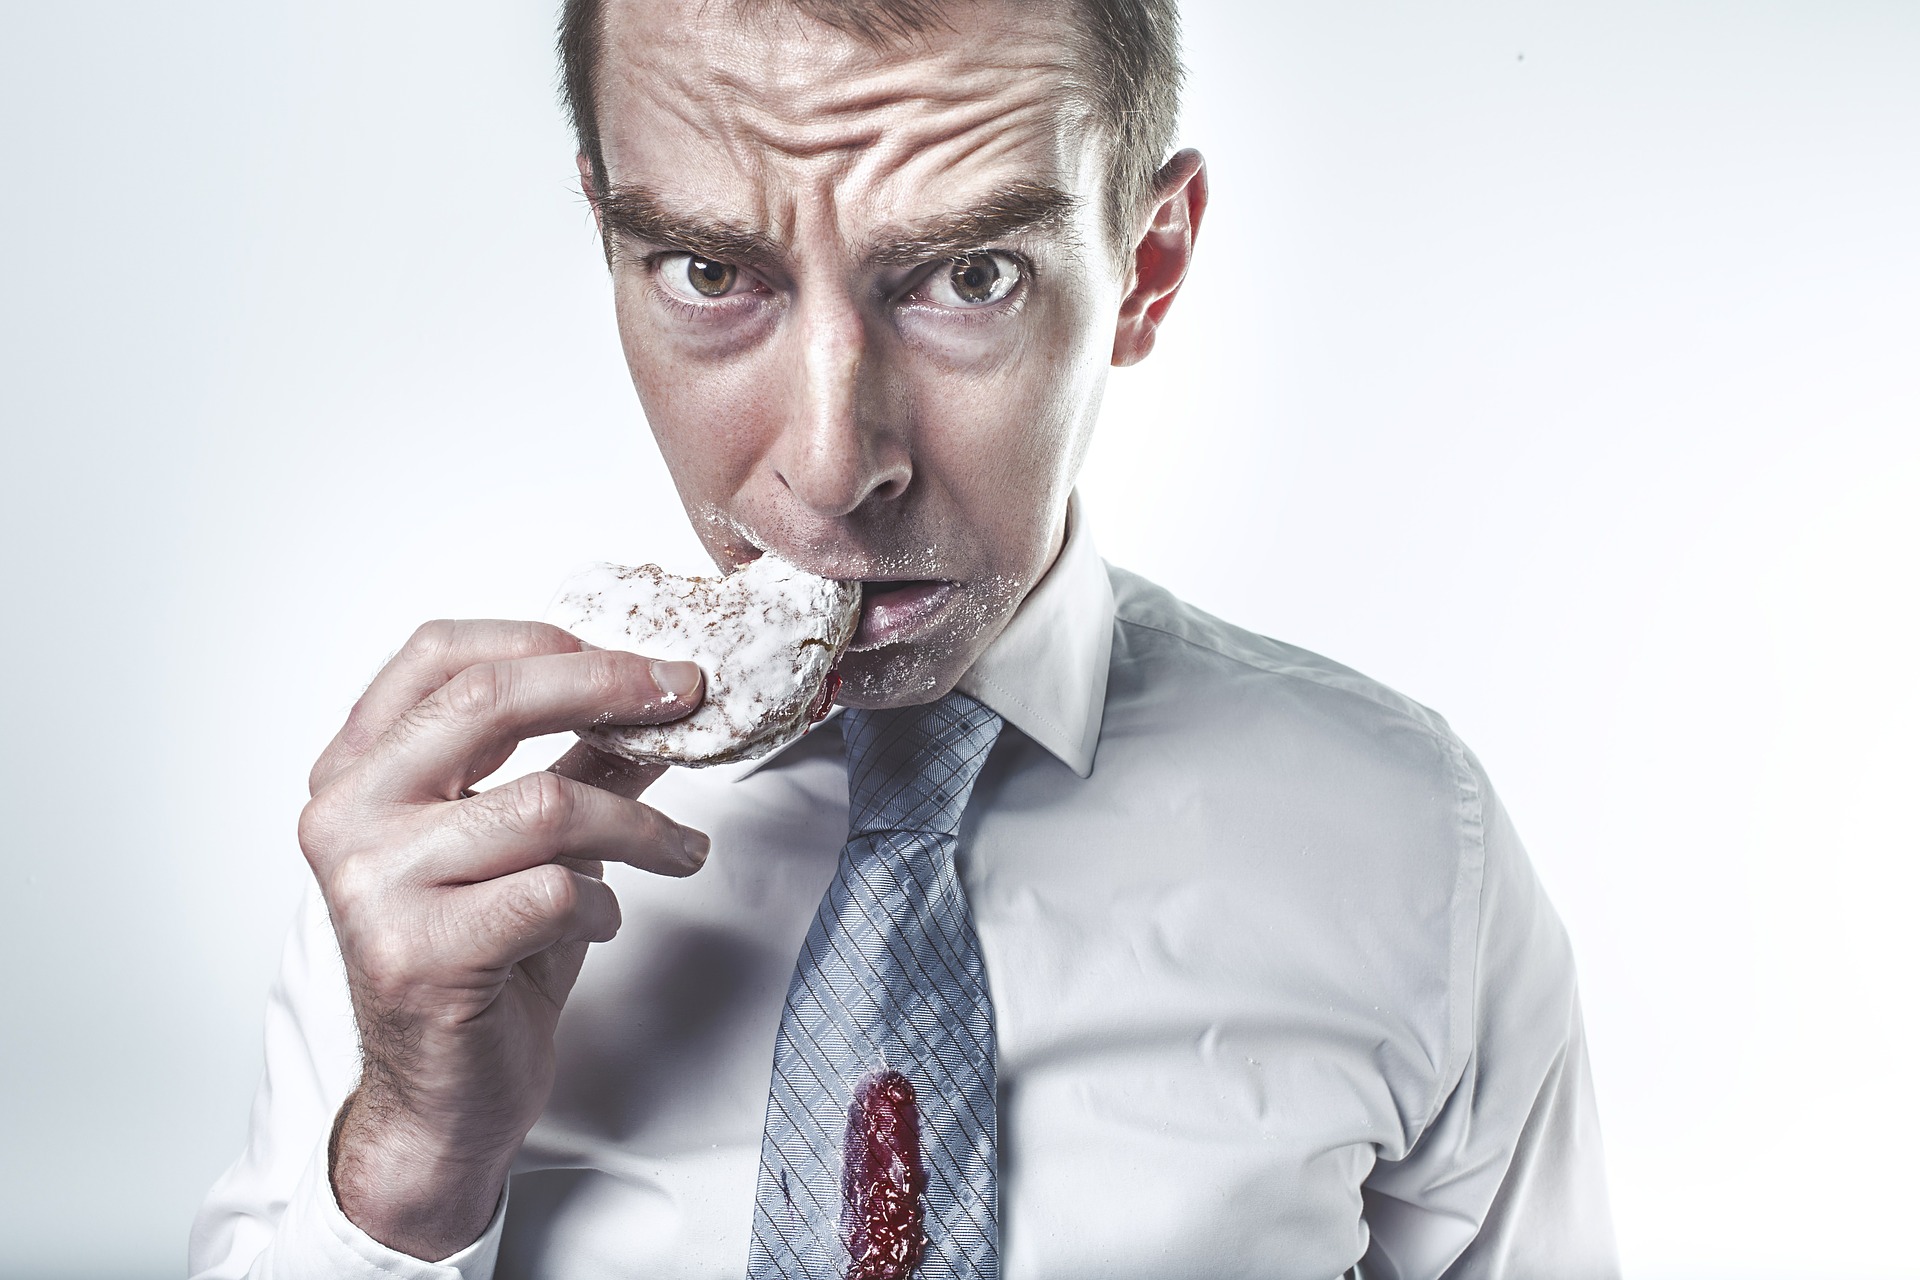 How to Permanently Overcome Emotional Eating